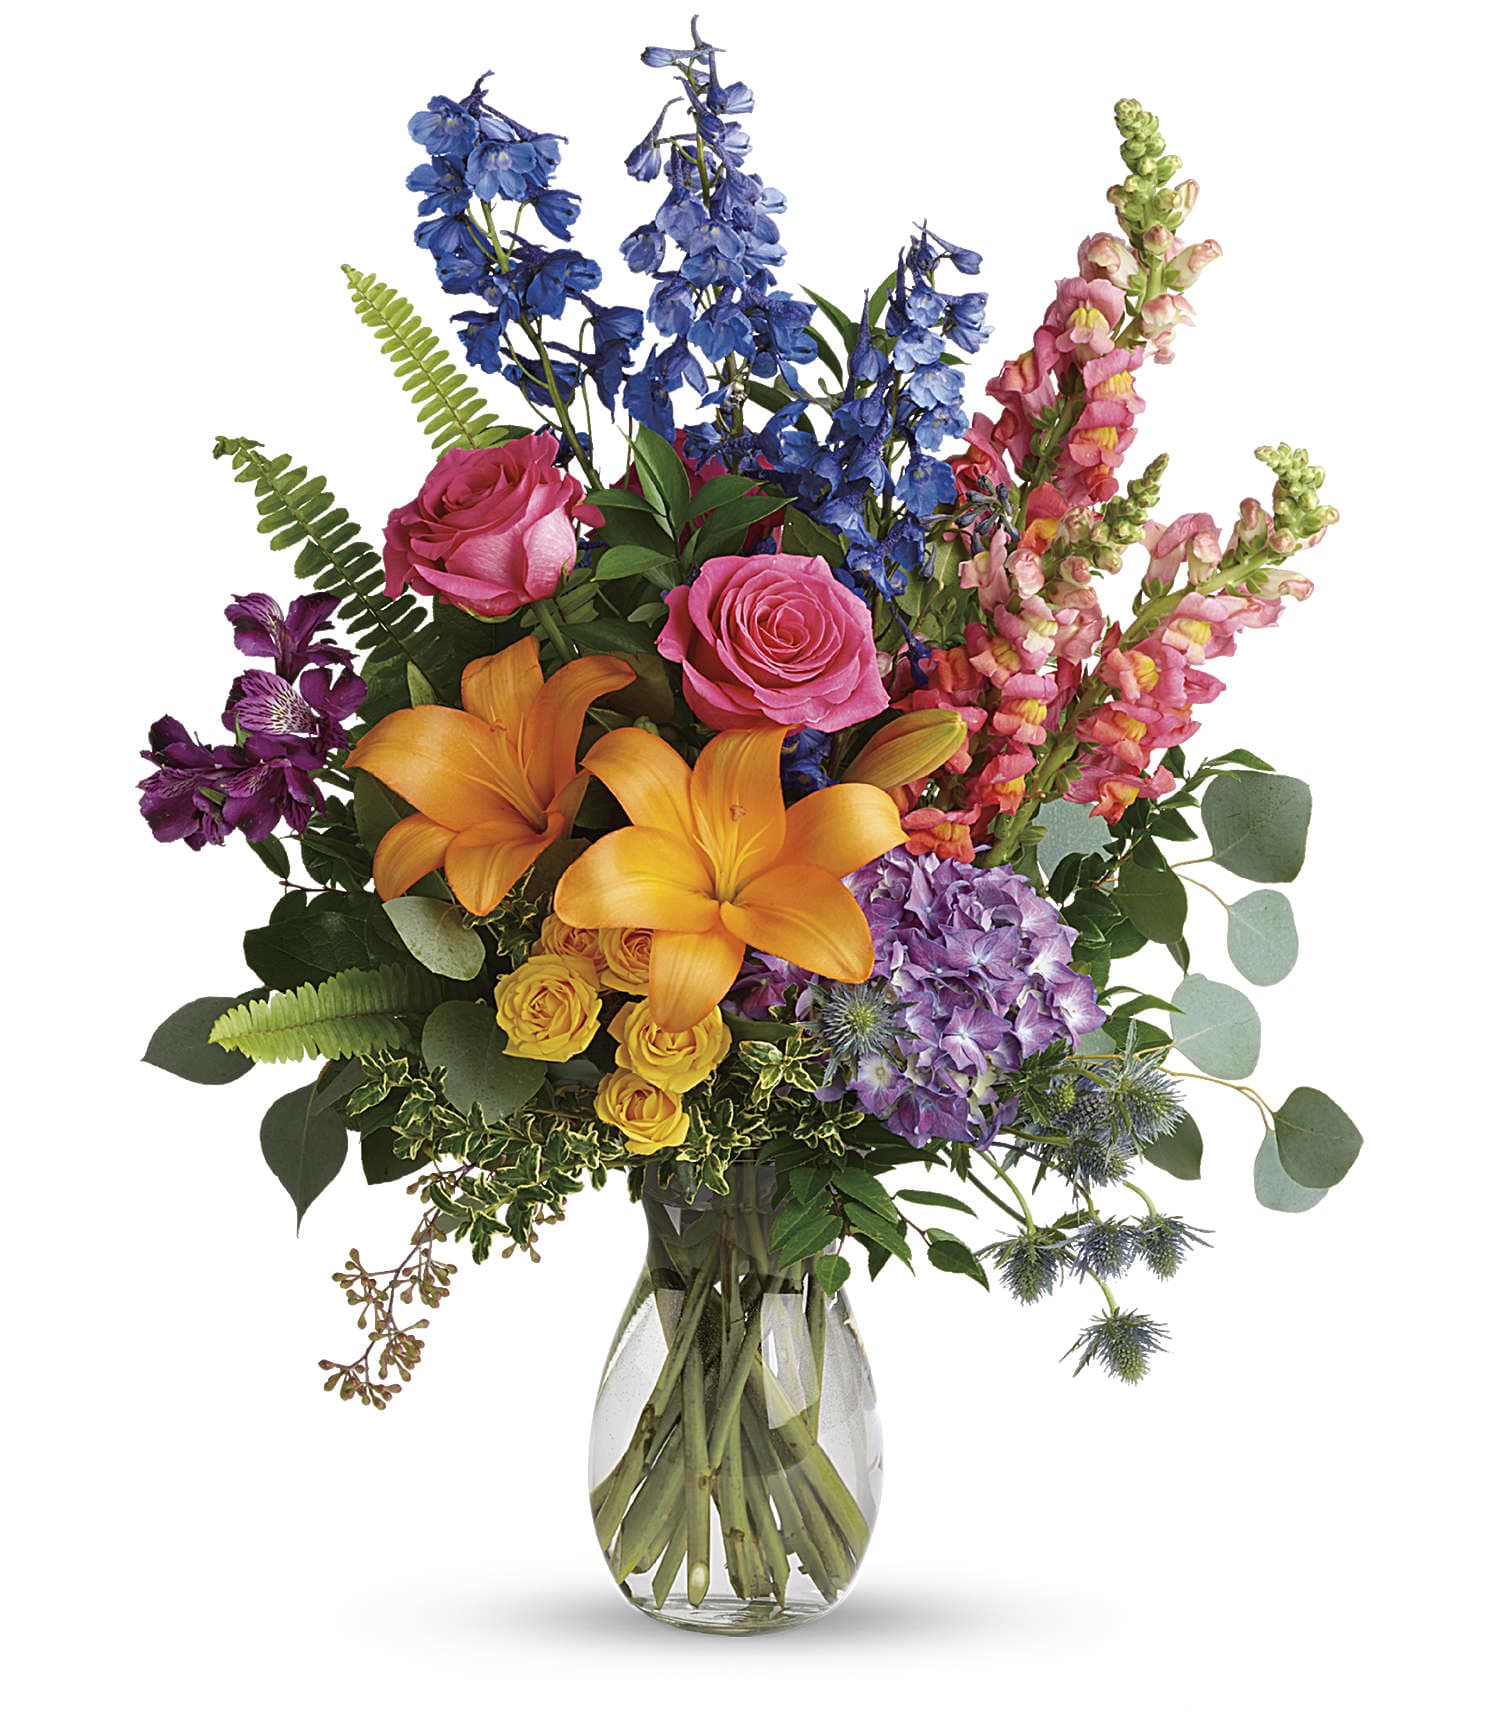 Colors of the Rainbow - Color any occasion beautiful with this lovely bouquet of hydrangea, roses and lilies in all the colors of the rainbow.  his colorful bouquet includes purple hydrangea, pink roses, yellow spray roses, orange asiatic lilies, purple alstroemeria, blue delphinium, pink snapdragons, blue eryngium, huckleberry, oregonia, Israeli ruscus, sword fern, silver dollar eucalyptus, seeded eucalyptus, and lemon leaf. Delivered in a jordan vase. Approximately 22&quot; W x 28 1/2&quot; H